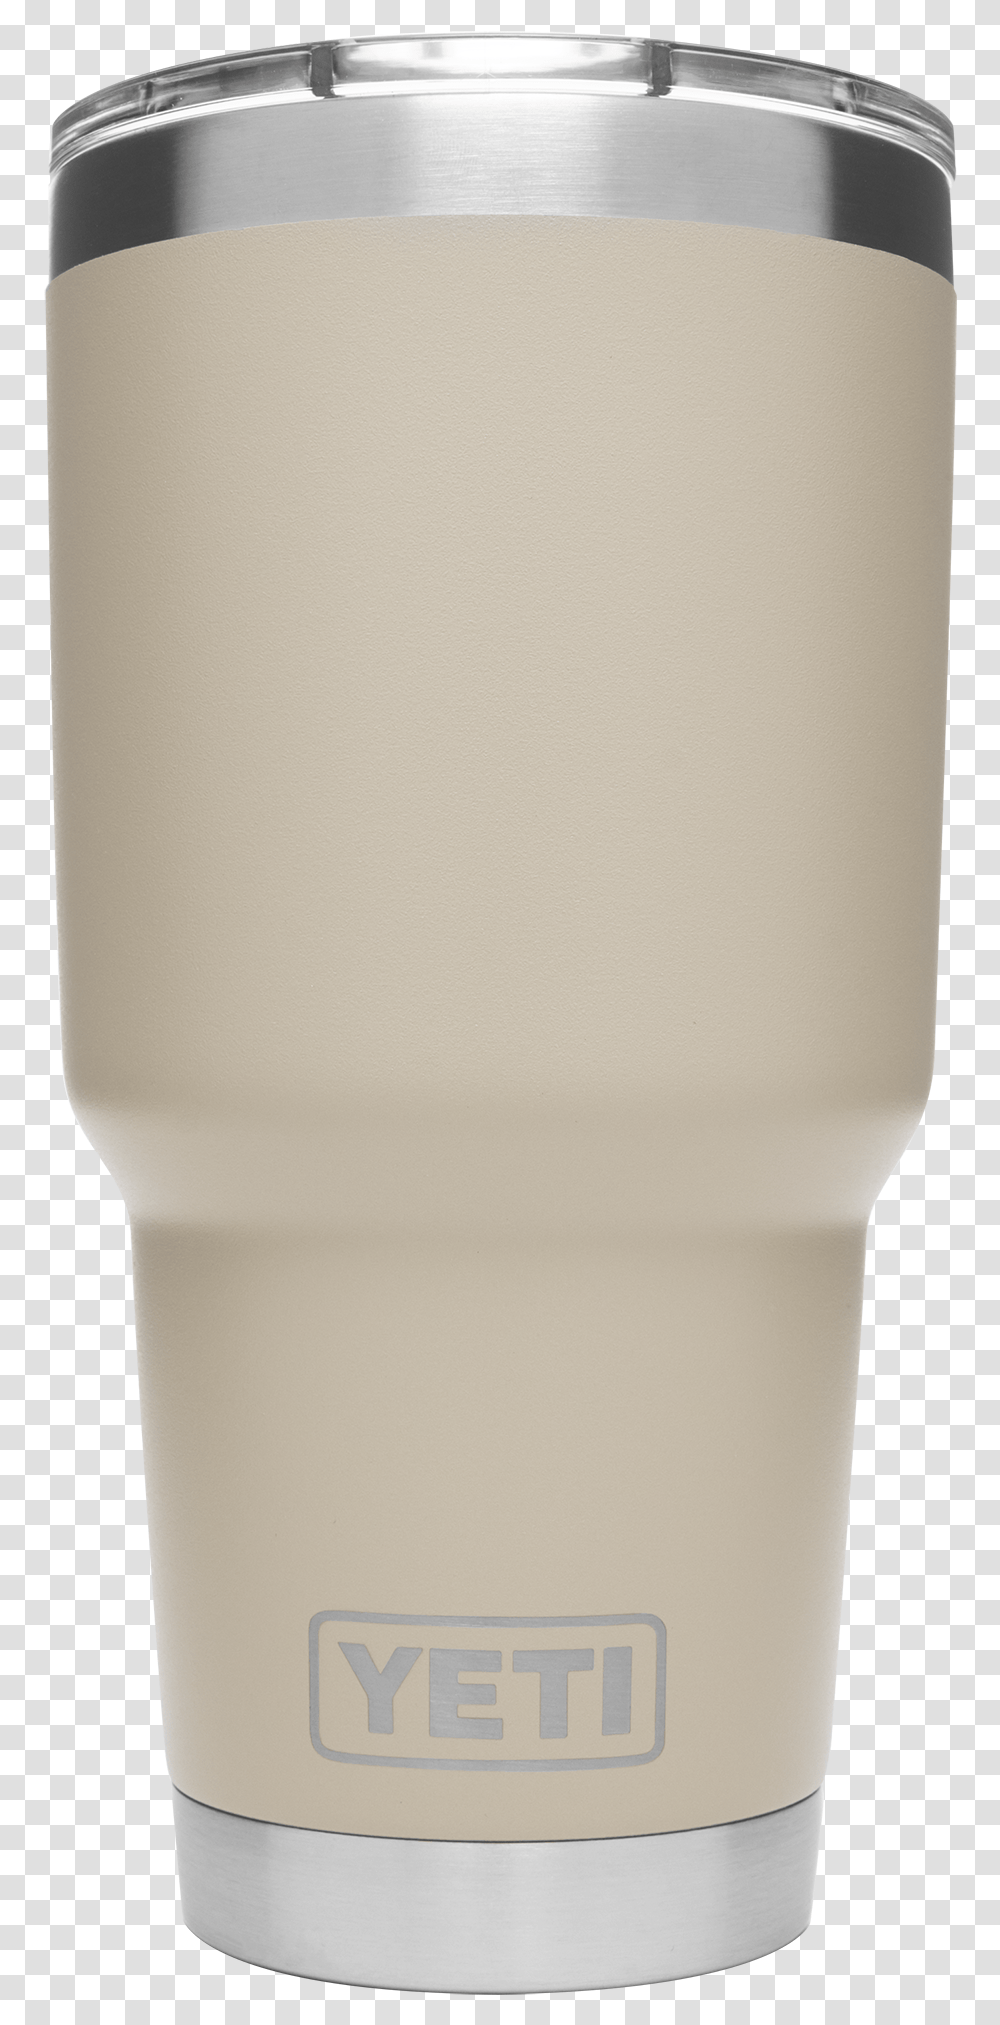 Yeti Sand, Lamp, Cup, Coffee Cup, Bottle Transparent Png